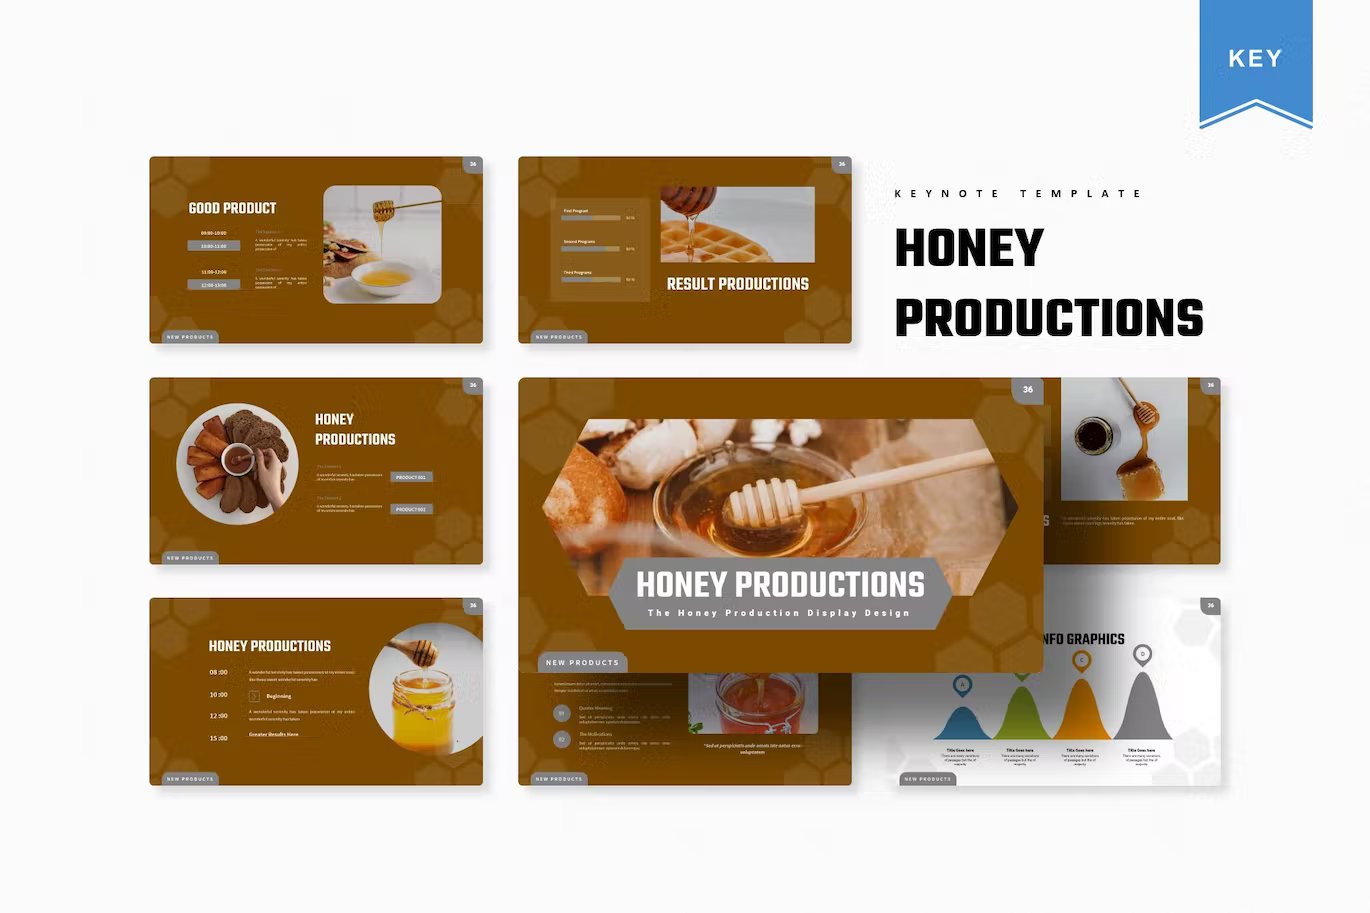 The topic of the presentation of honey.